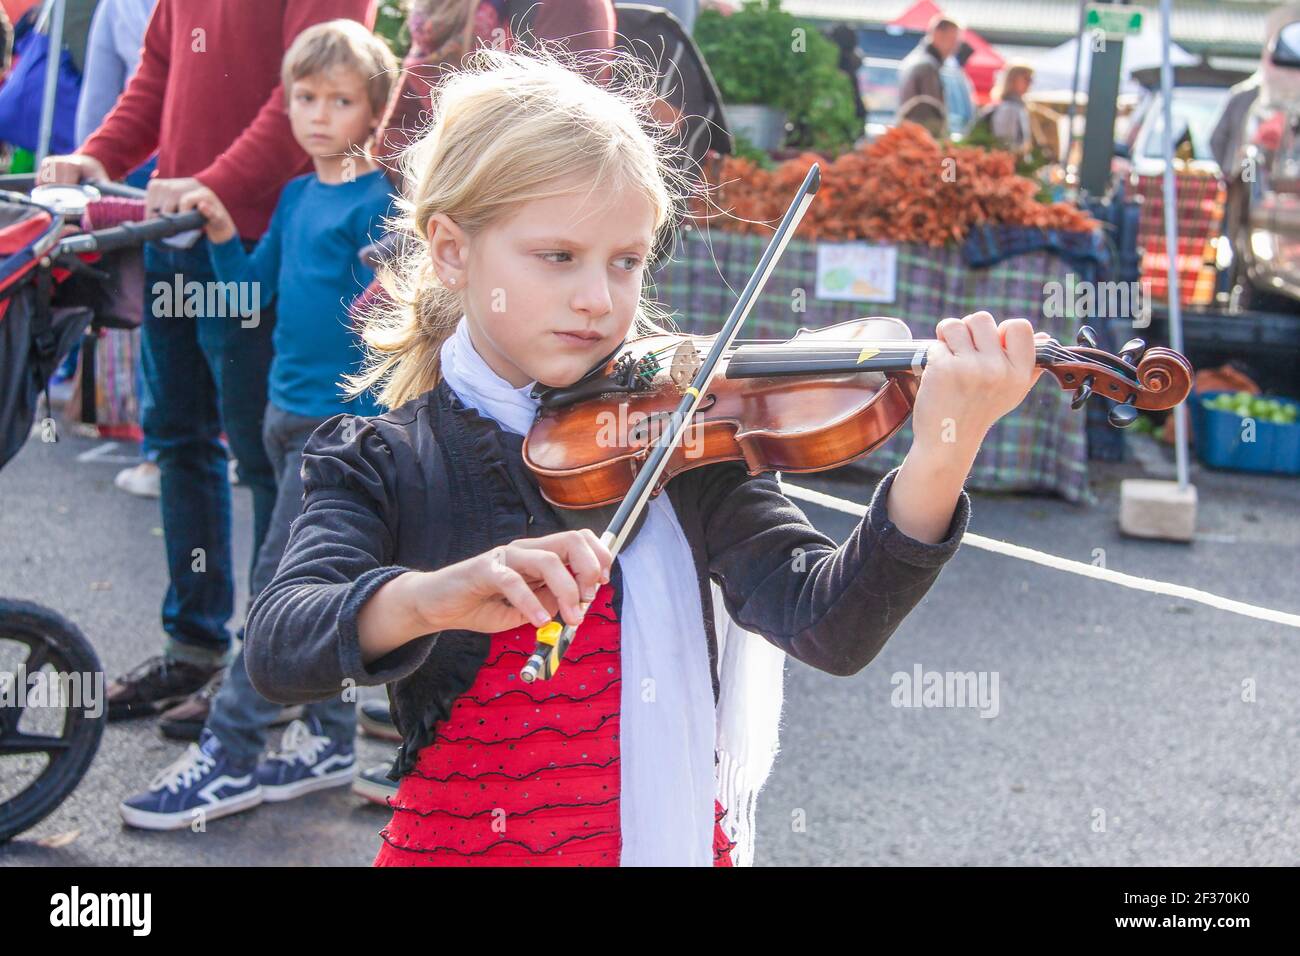 2019-10-19 Bloomington USA - Little girl concentrating on playing violin at farmers market as little boy with parents looks at her. Stock Photo